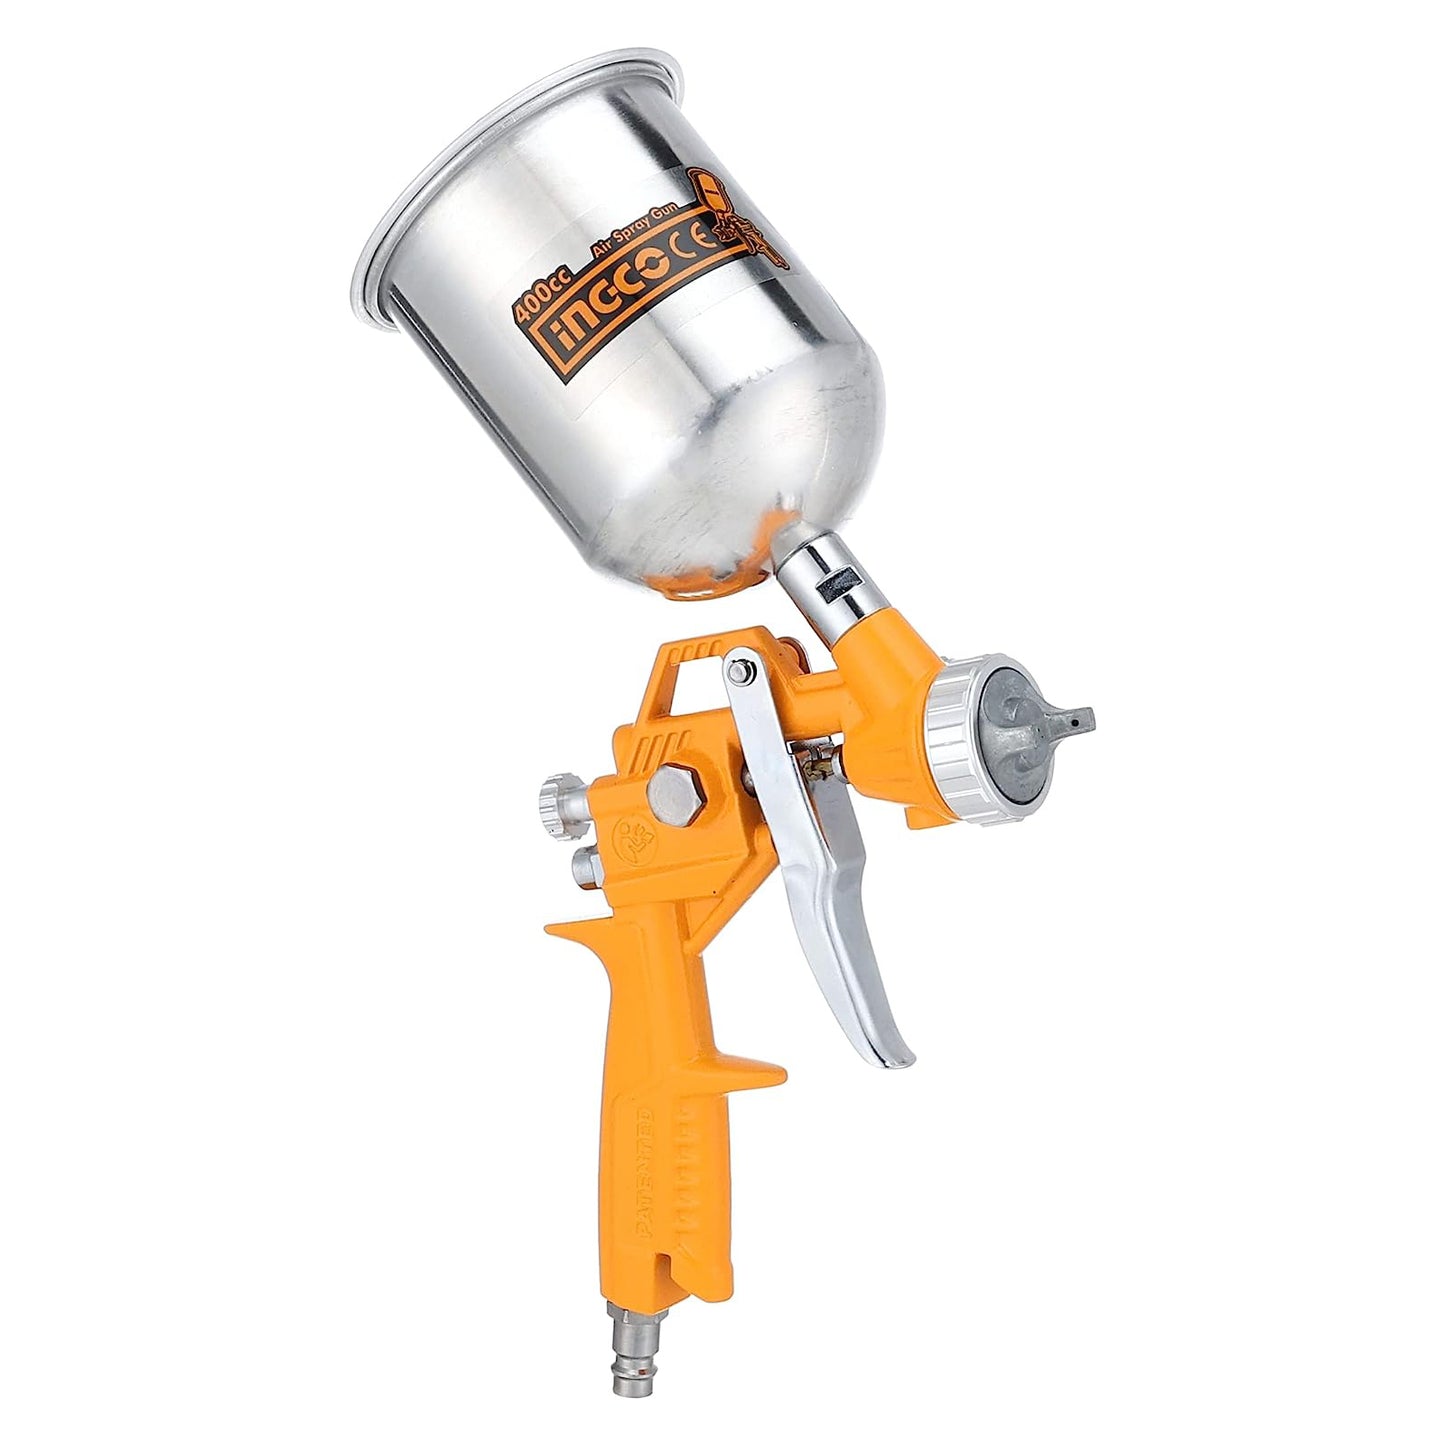 INGCO ASG4041 Air Paint Spray Gun for Base Coat with 400cc Paint Capacity, 1.5mm Standard Nozzle, and Up to 4bar Operating Pressure